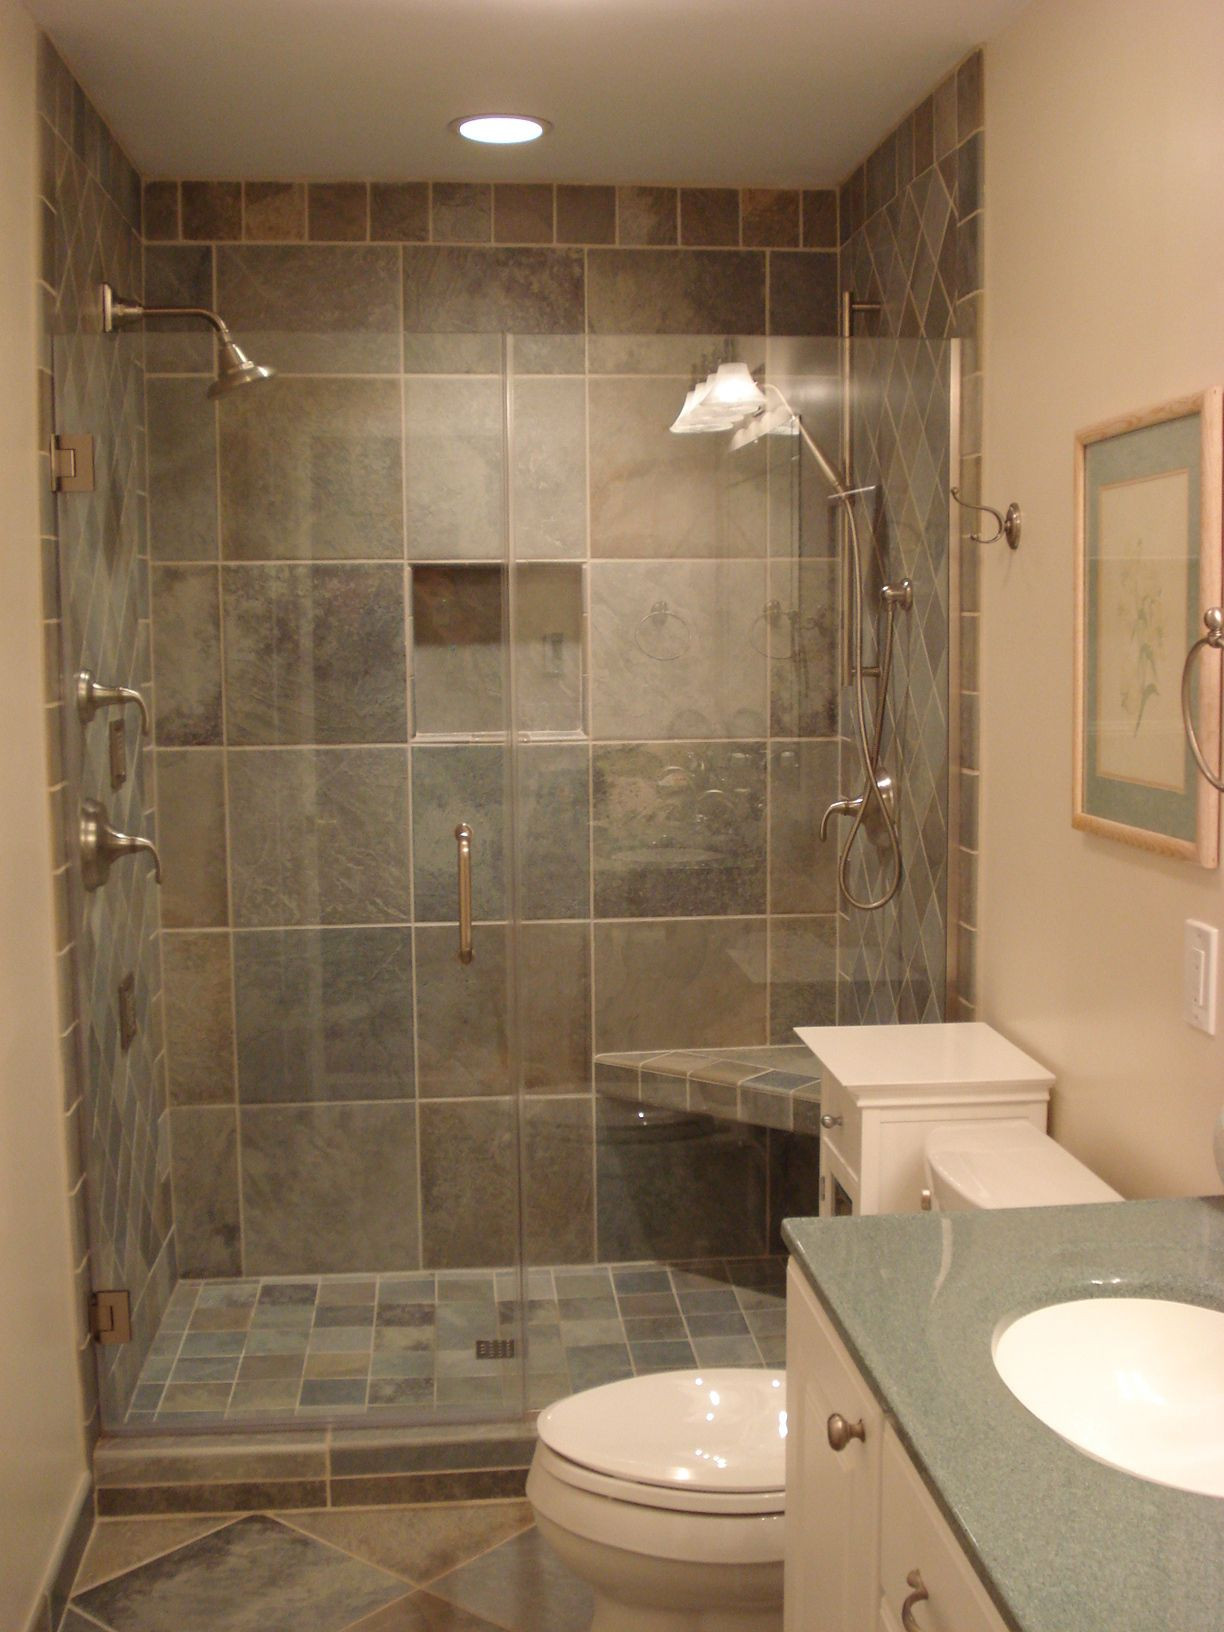 Best Tile For Bathroom Shower
 Bathroom and Shower Remodel Ideas and Tricks for a Limited